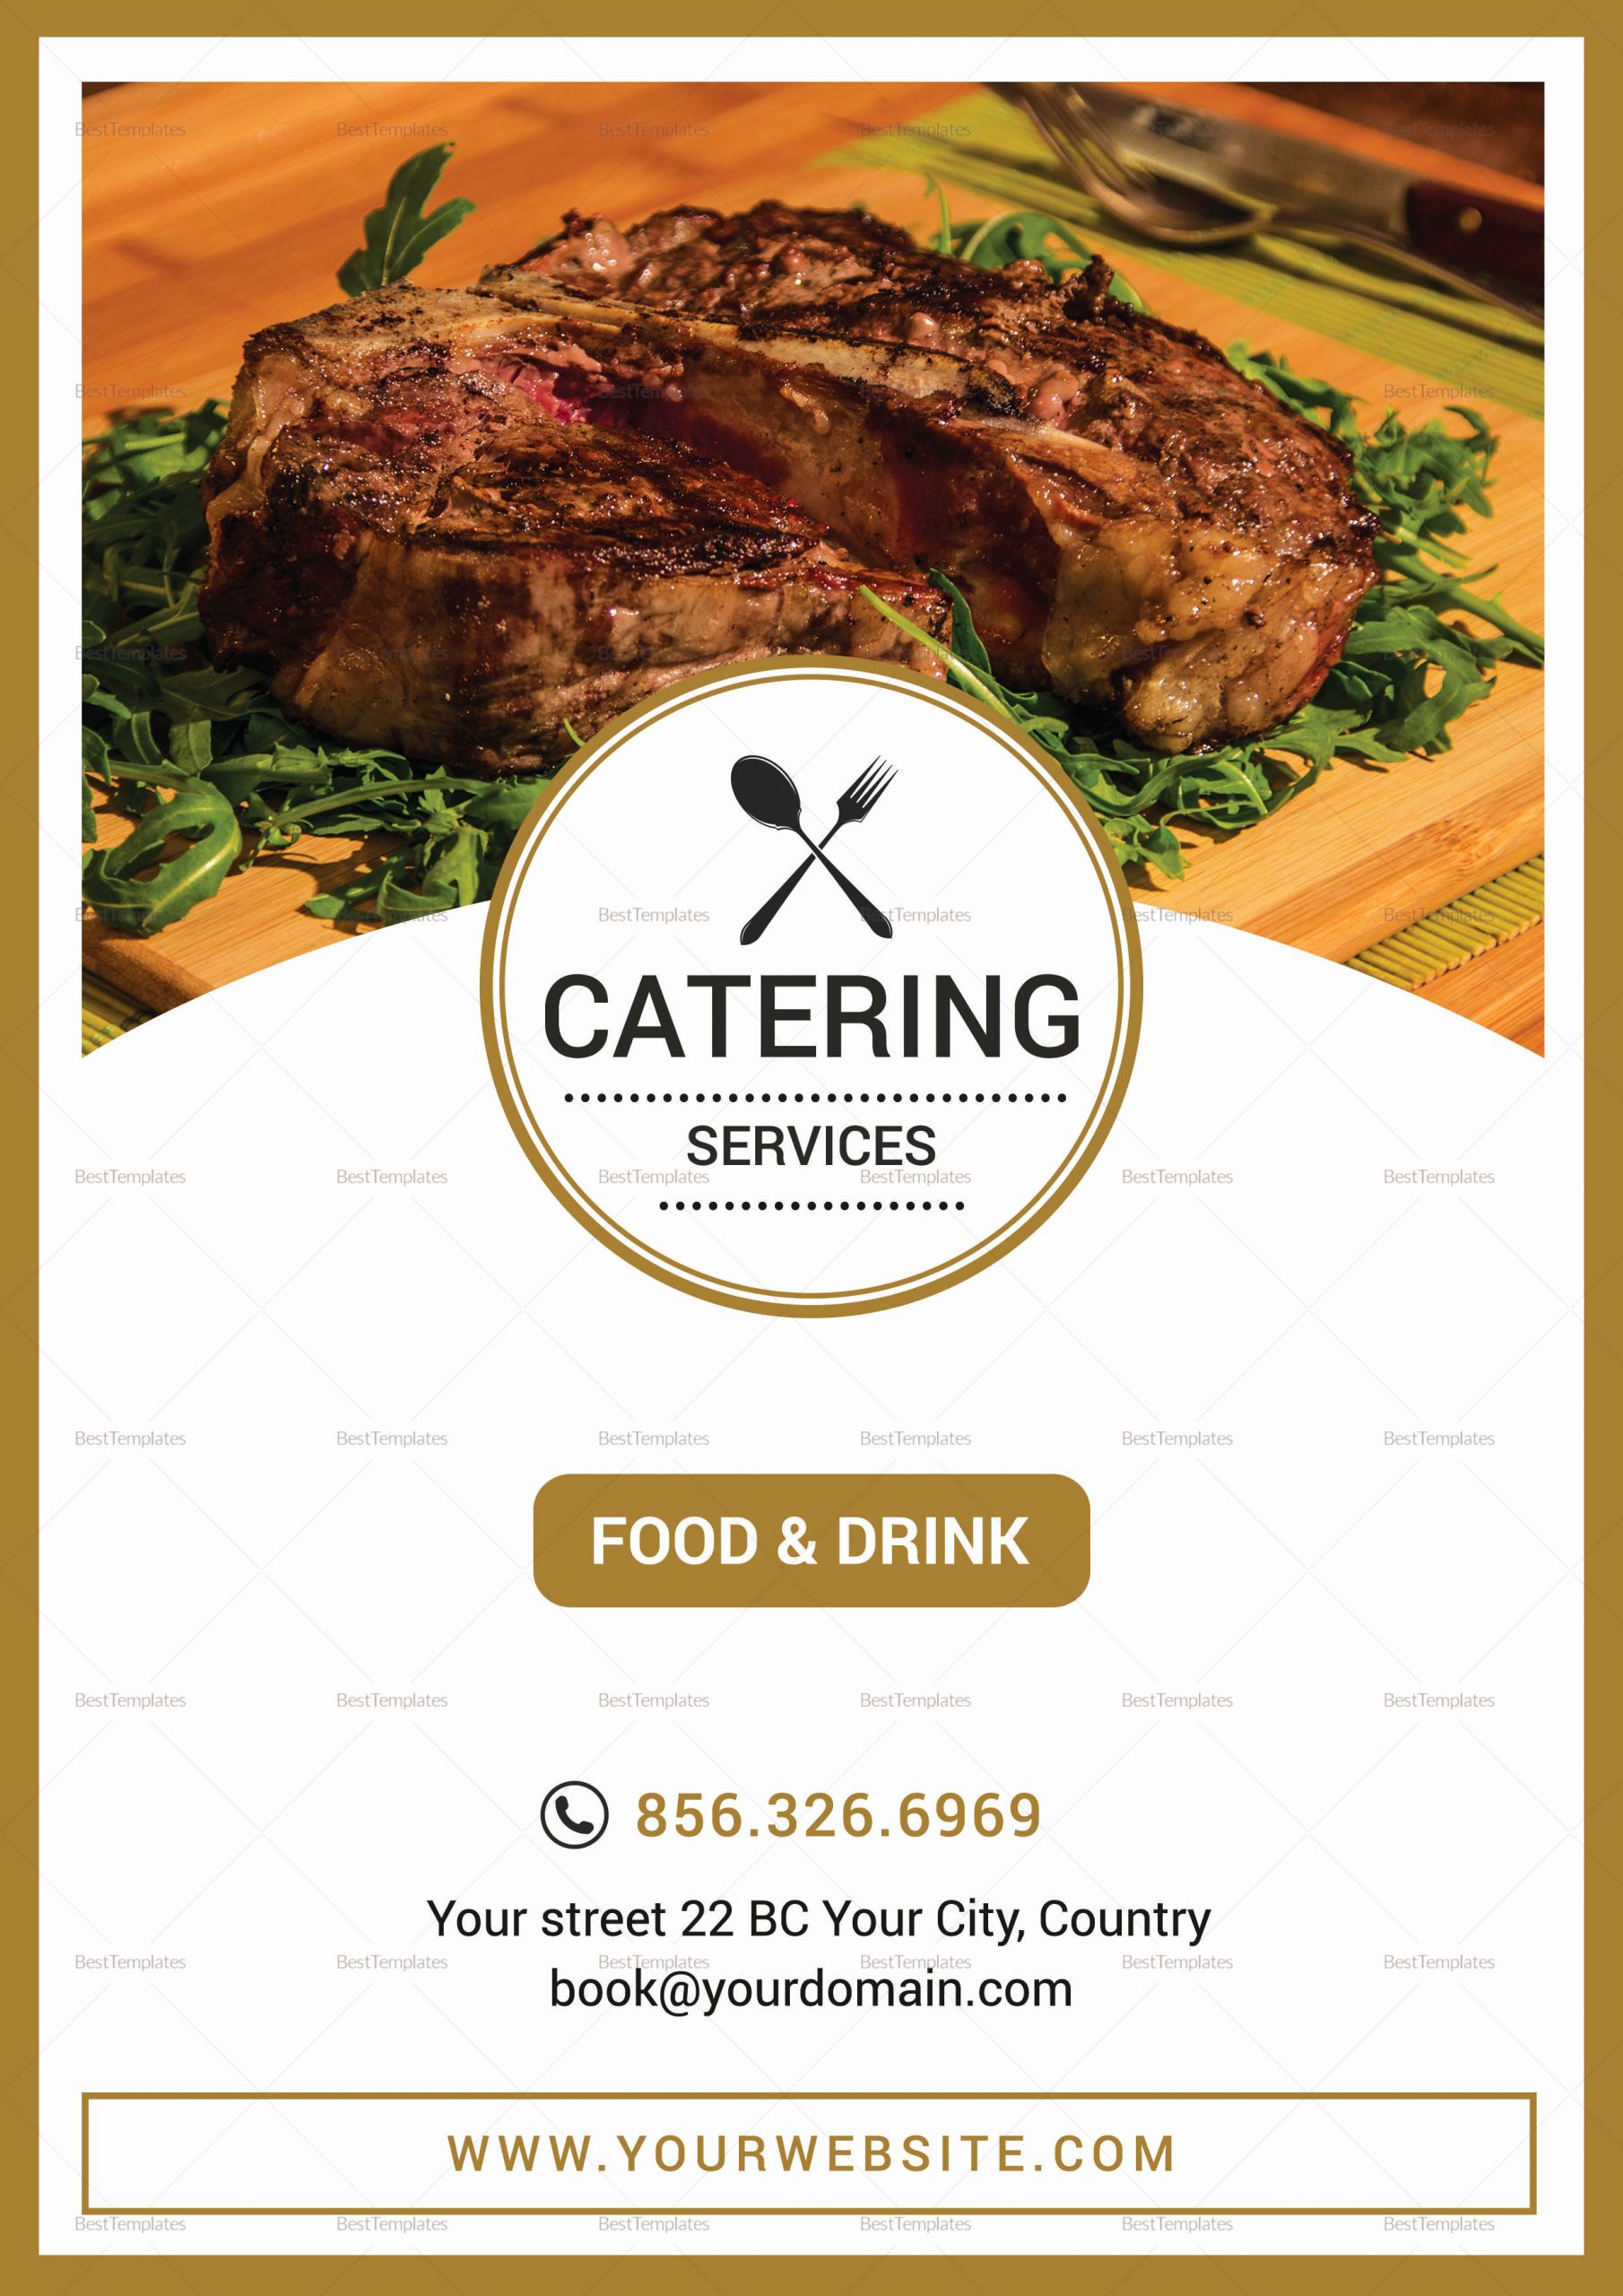 Menu Of Services Template Unique Catering Services Menu Design Template In Psd Publisher Word